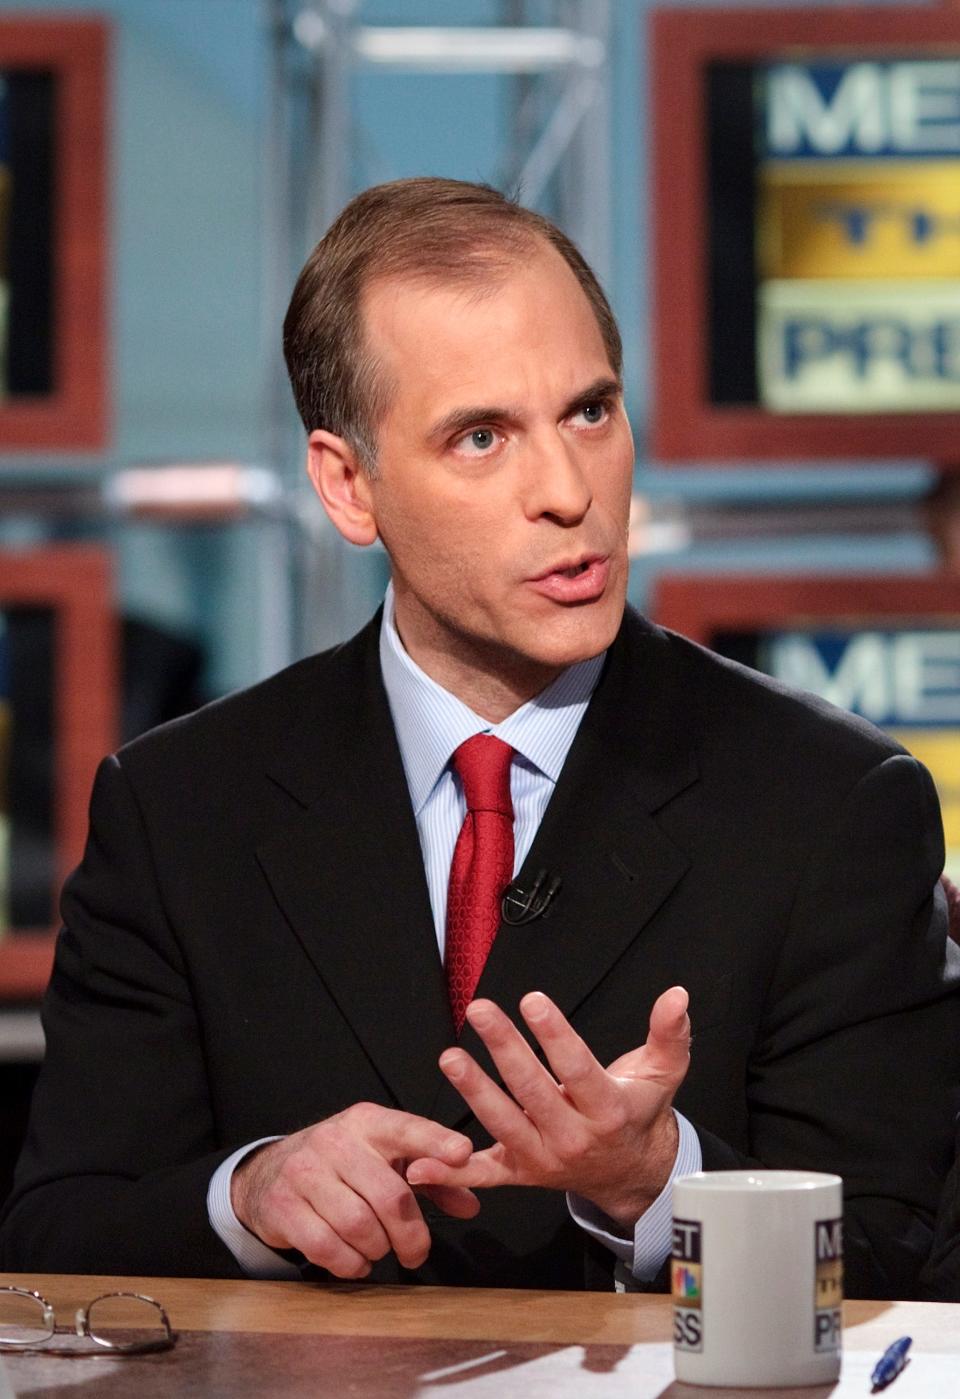 Mark Zandi speaks during a live taping of "Meet the Press" at the NBC studios on Jan. 11, 2009, in Washington.